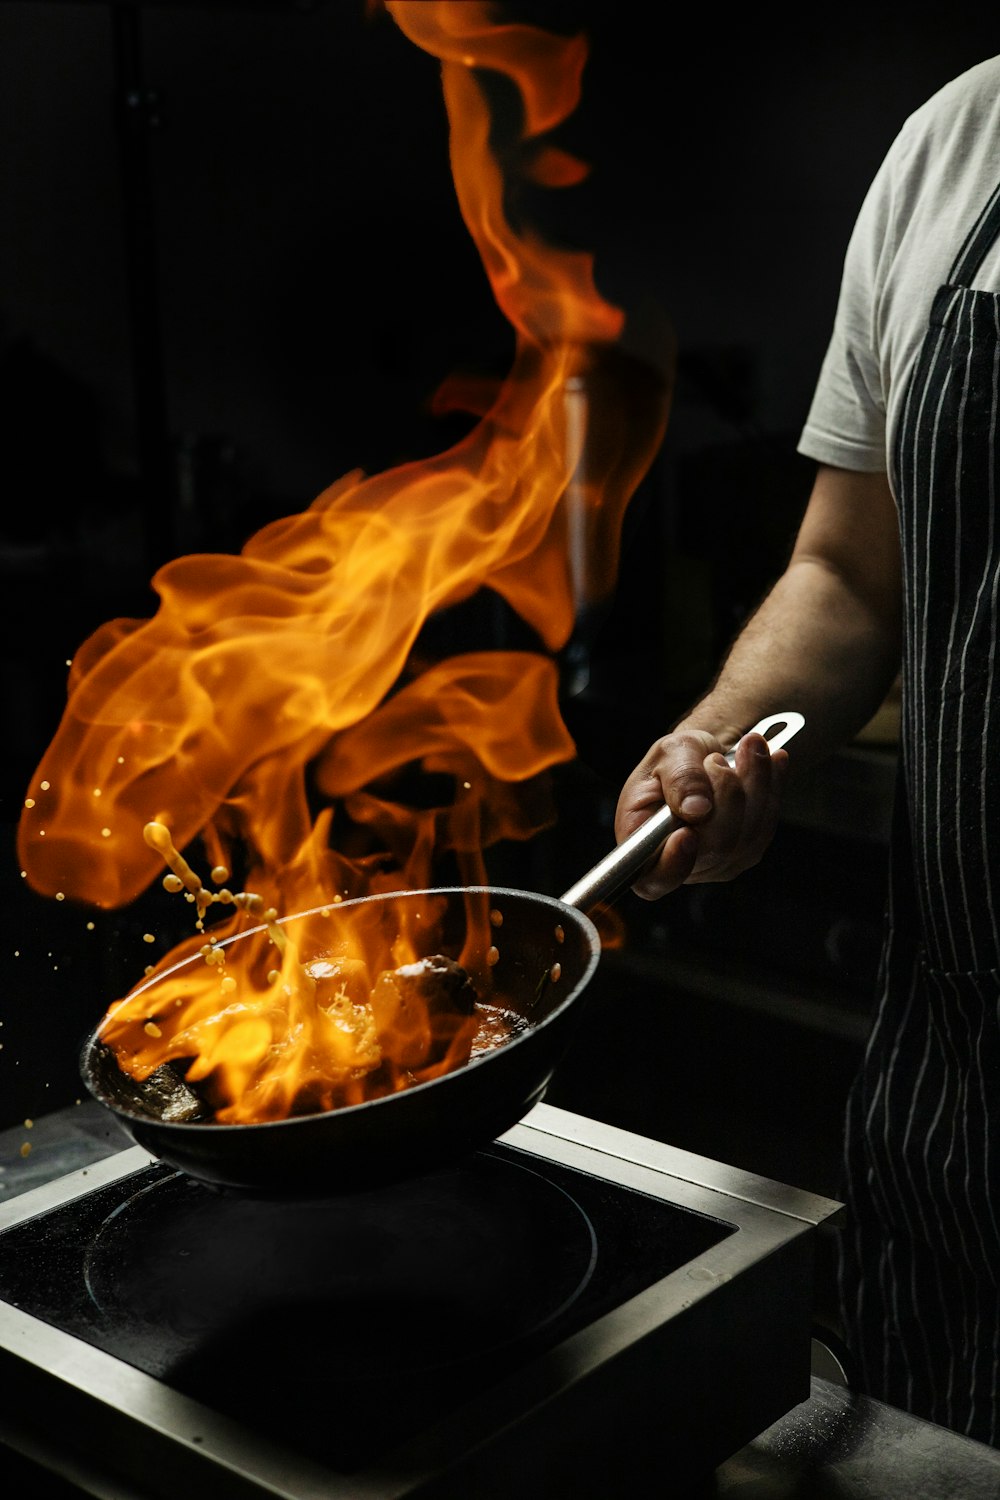 a person cooking on a stove with flames